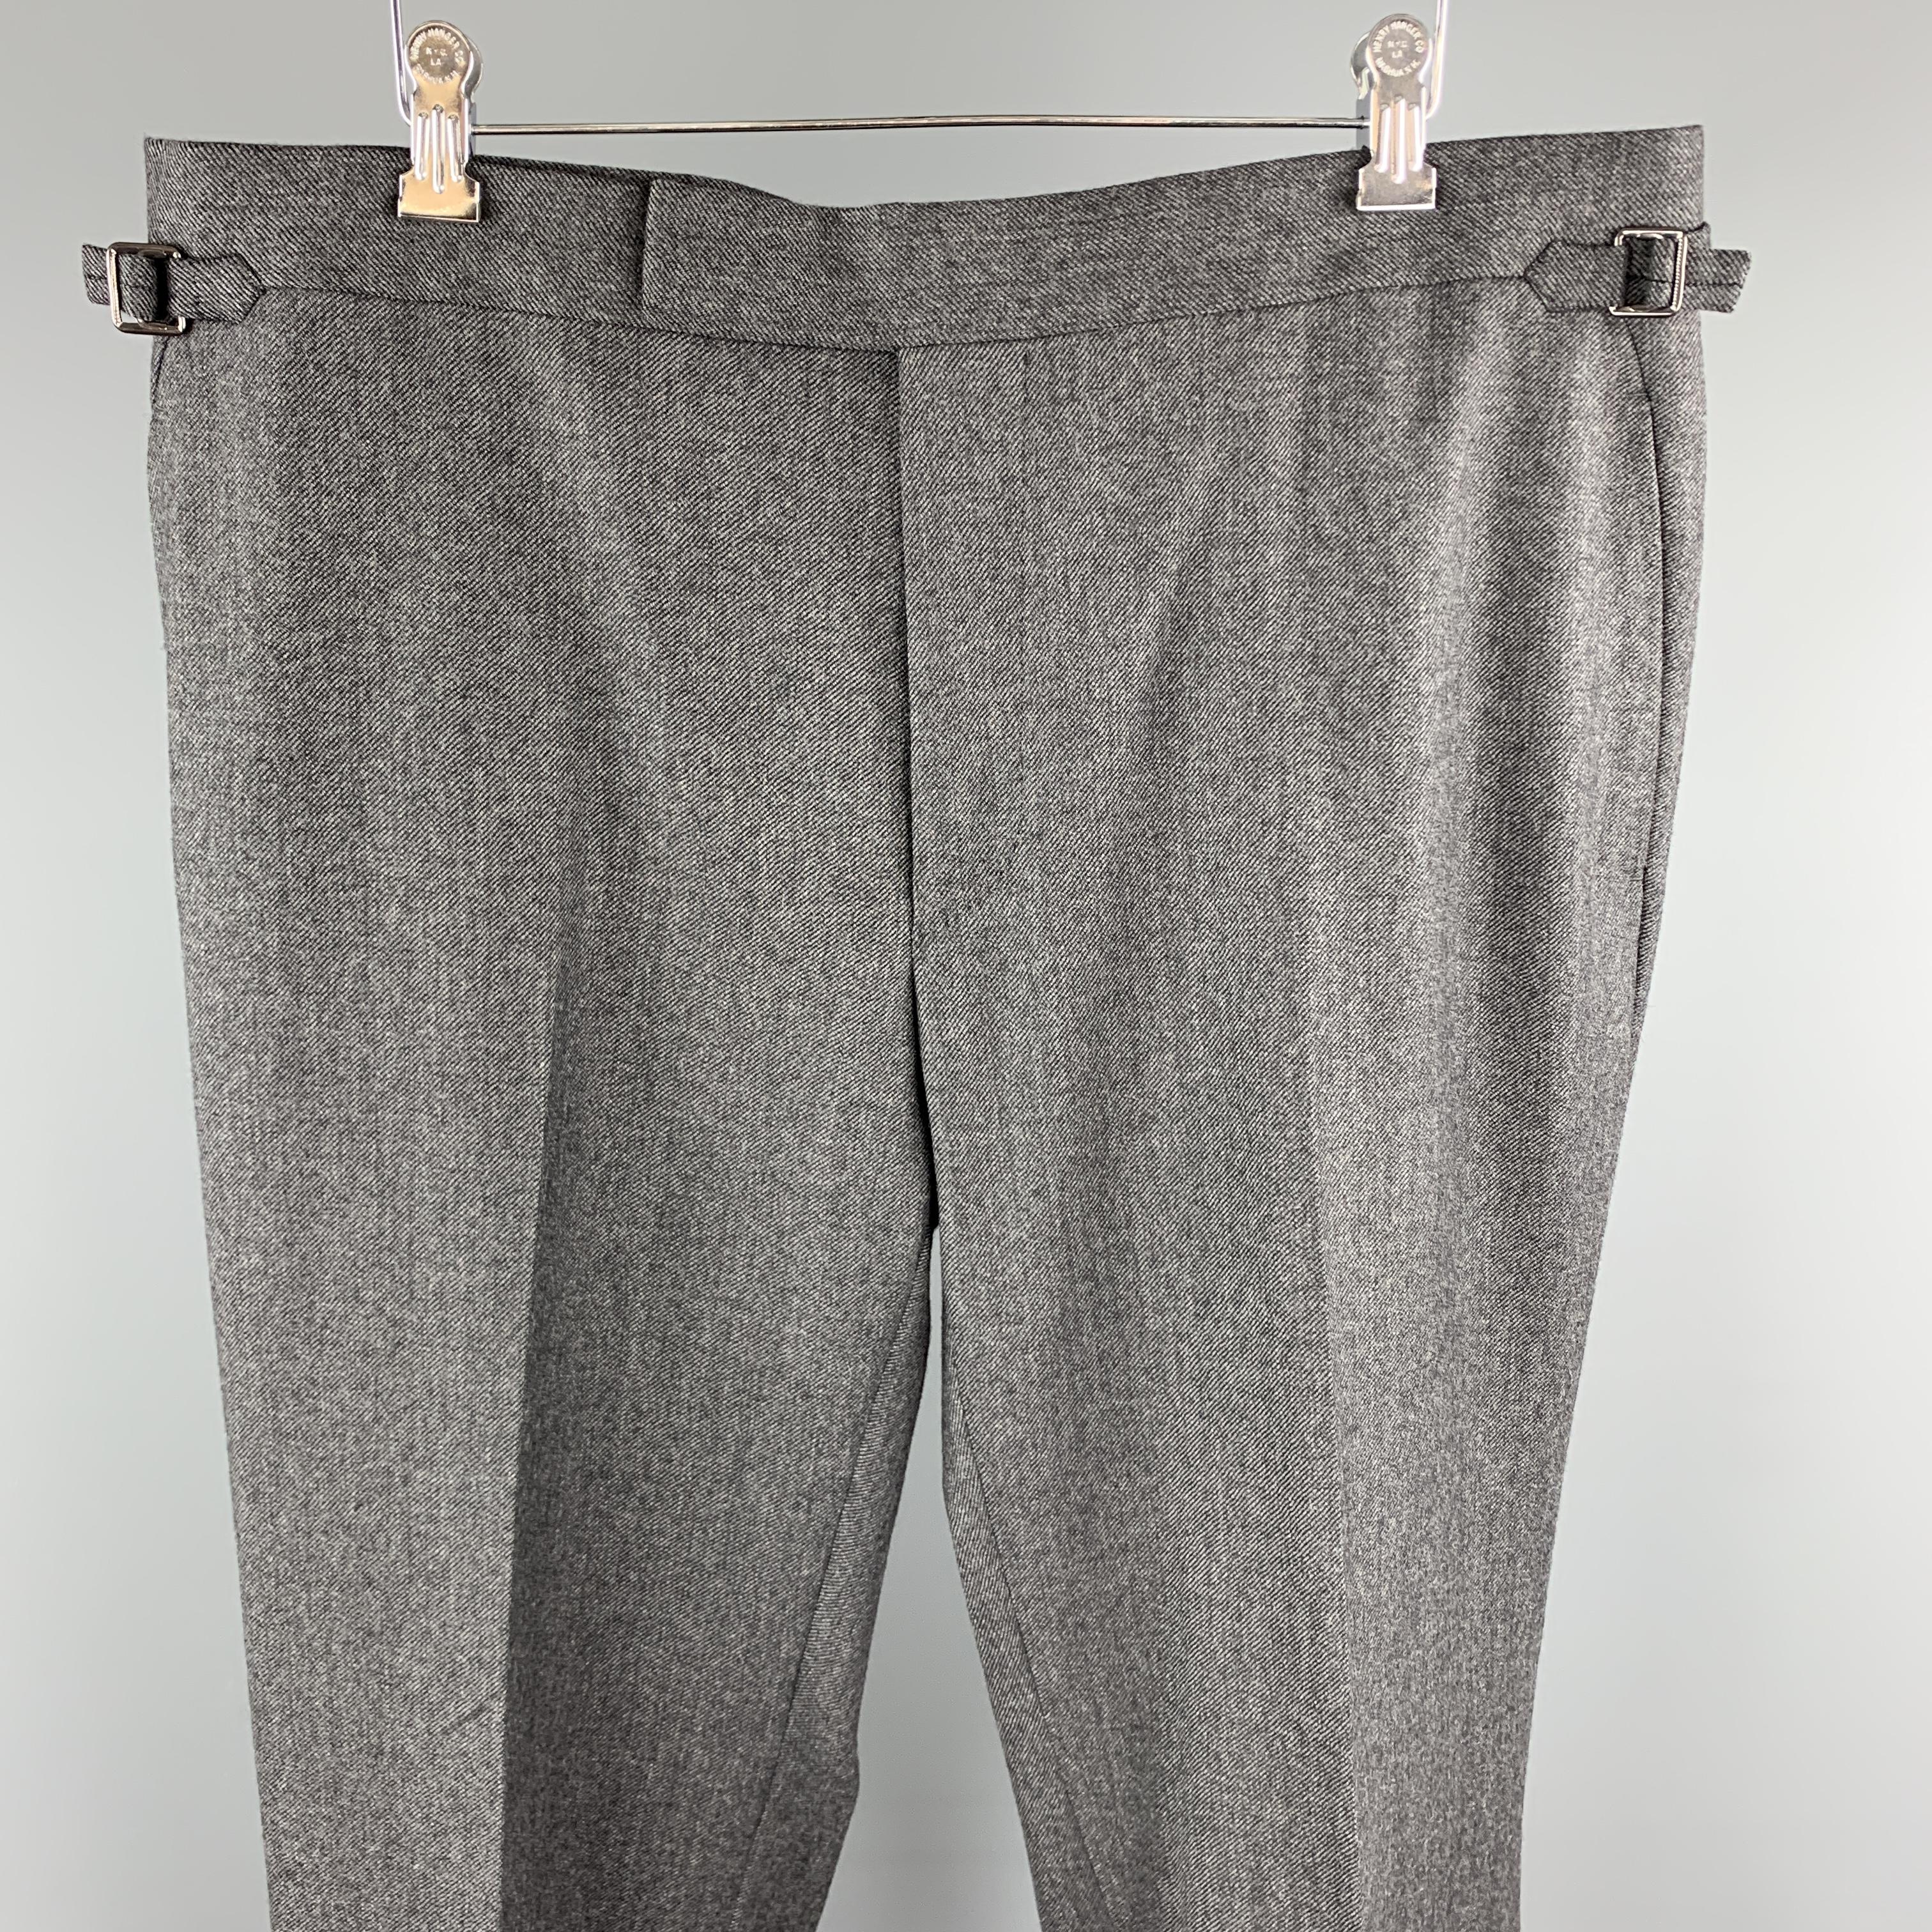 TOM FORD dress pants come in dark heathered gray wool blend twill with a flat front, tab waistband and adjustable side tabs. 

Excellent Pre-Owned Condition.
Marked: (size tag removed)

Measurements:

Waist: 40 in.
Rise: 12 in.
Inseam: 32 in.